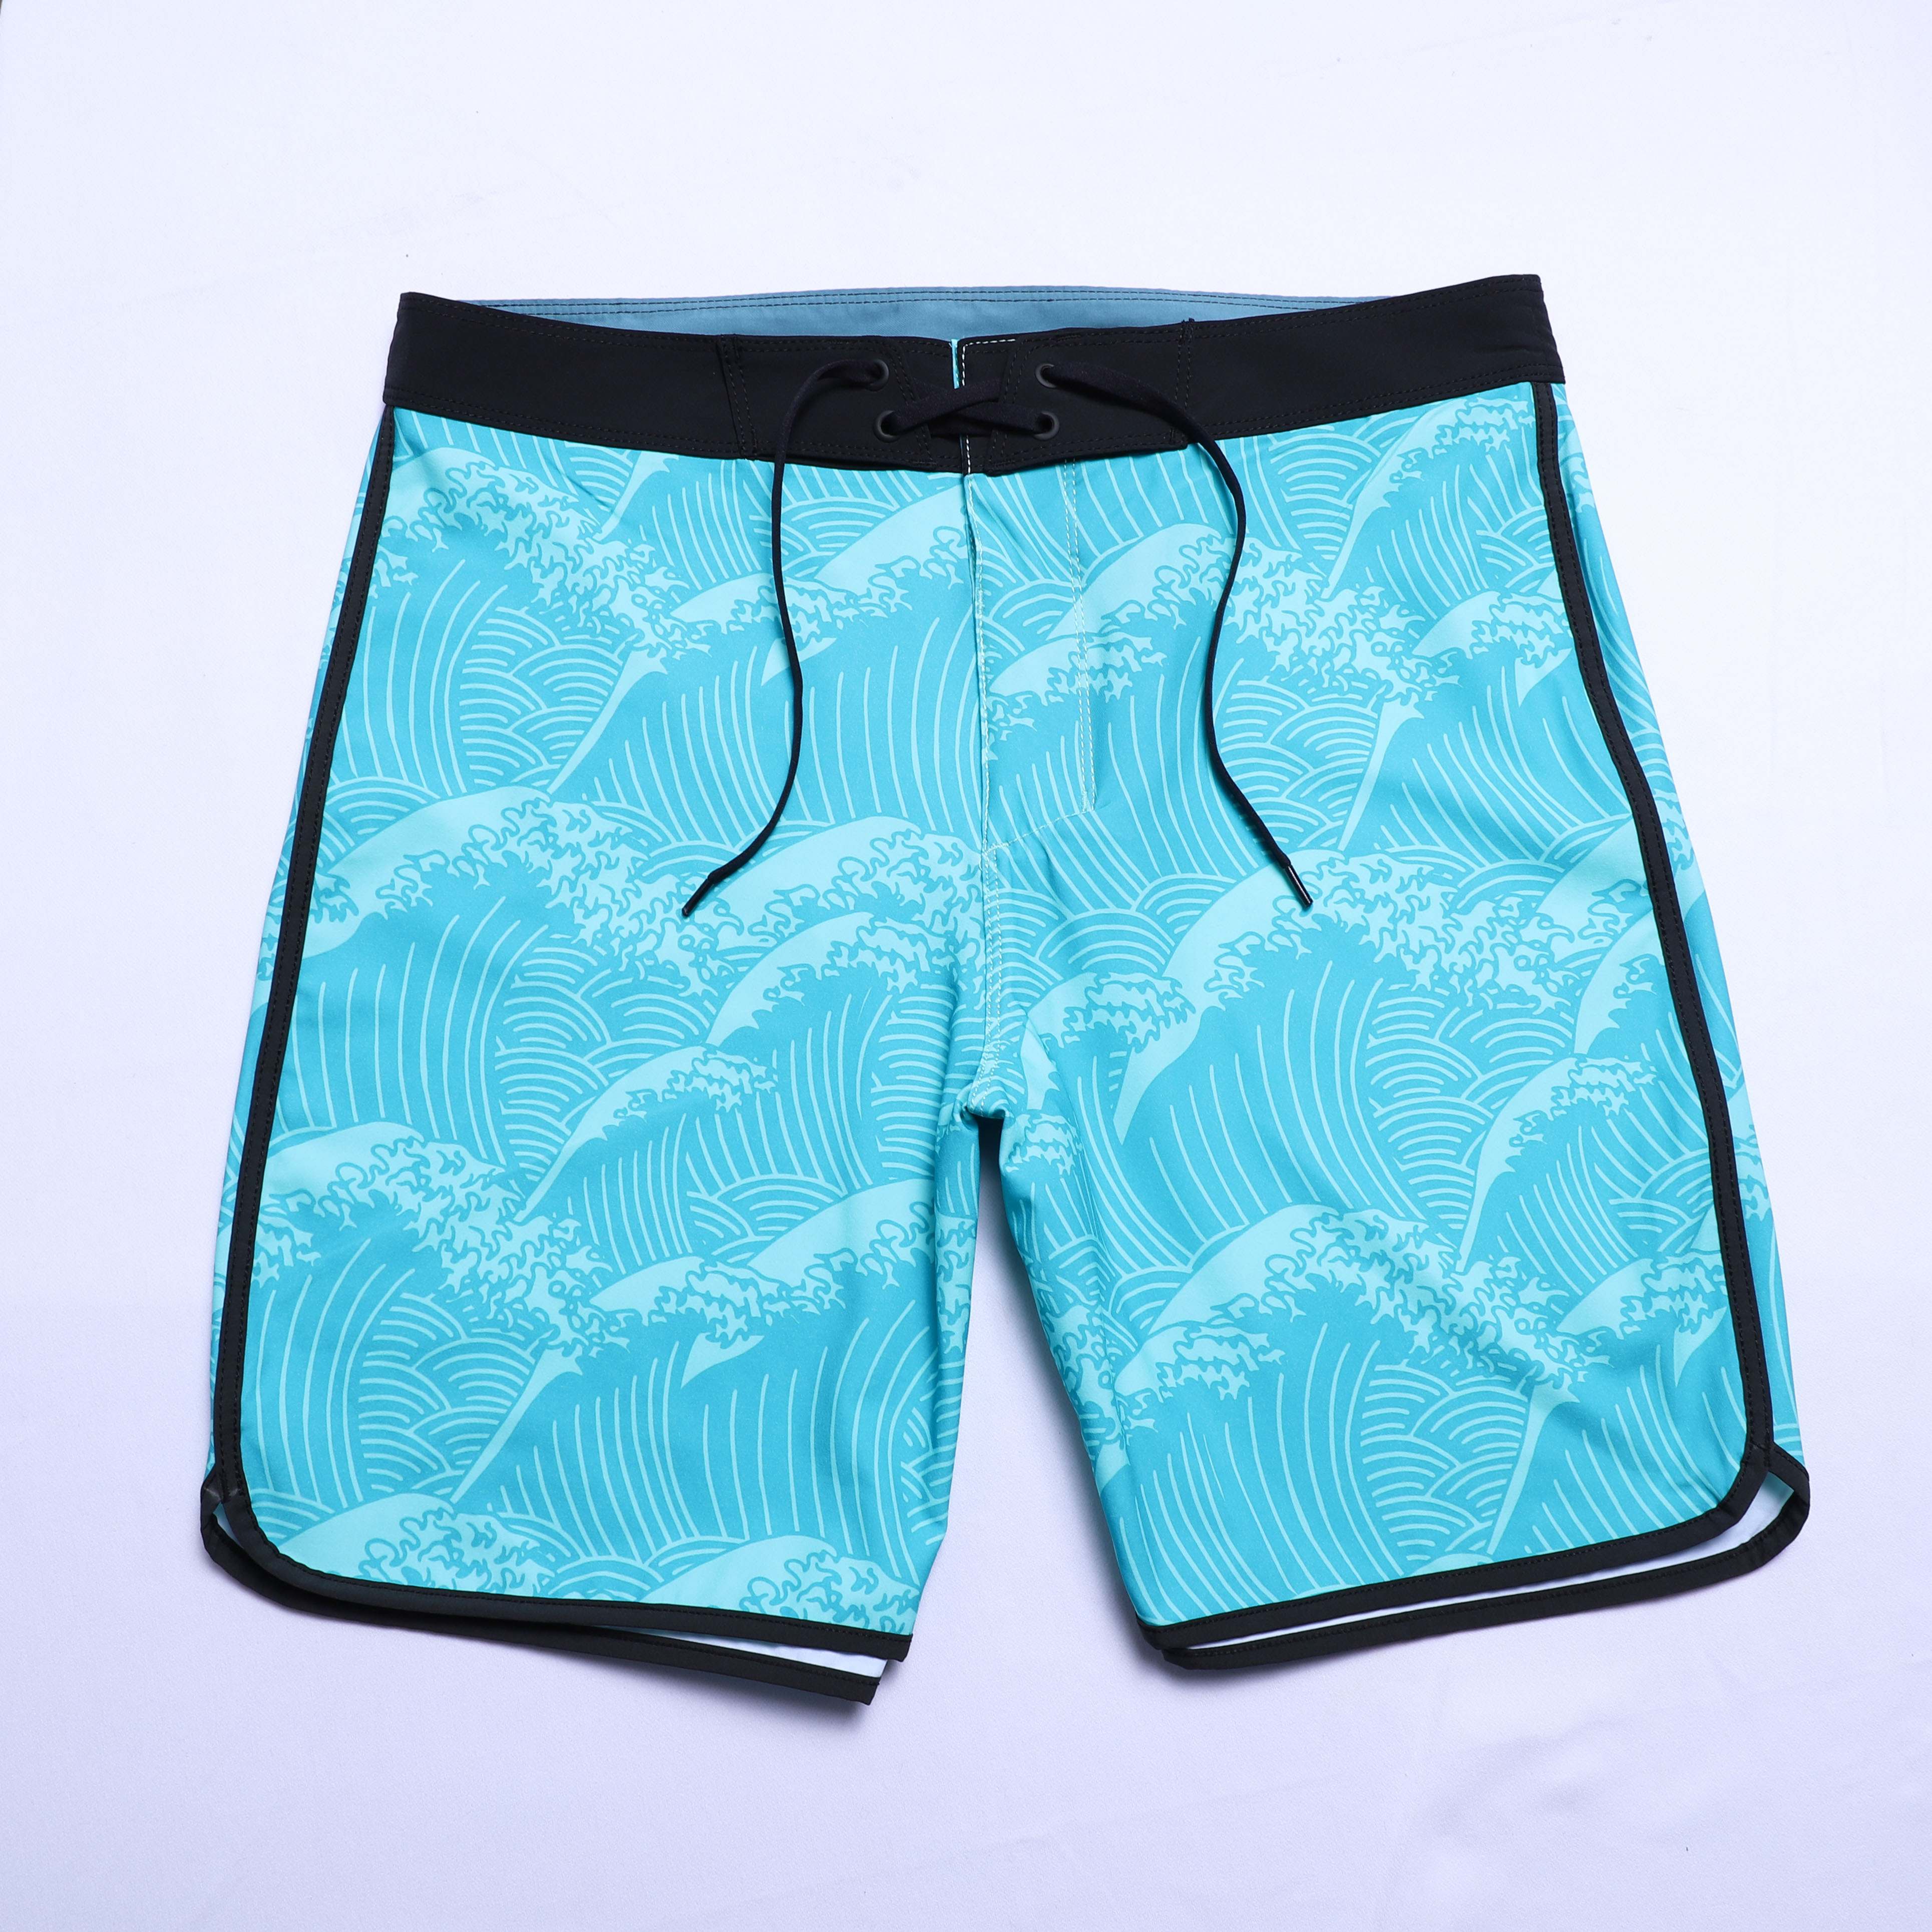 

Shorts swimshorts Bermuda boardshorts Fashion GYM Swimwear basketball pants 4way stretch Surfing Water proof Quick Dry recycled polyester Beach shorts sports, Customize